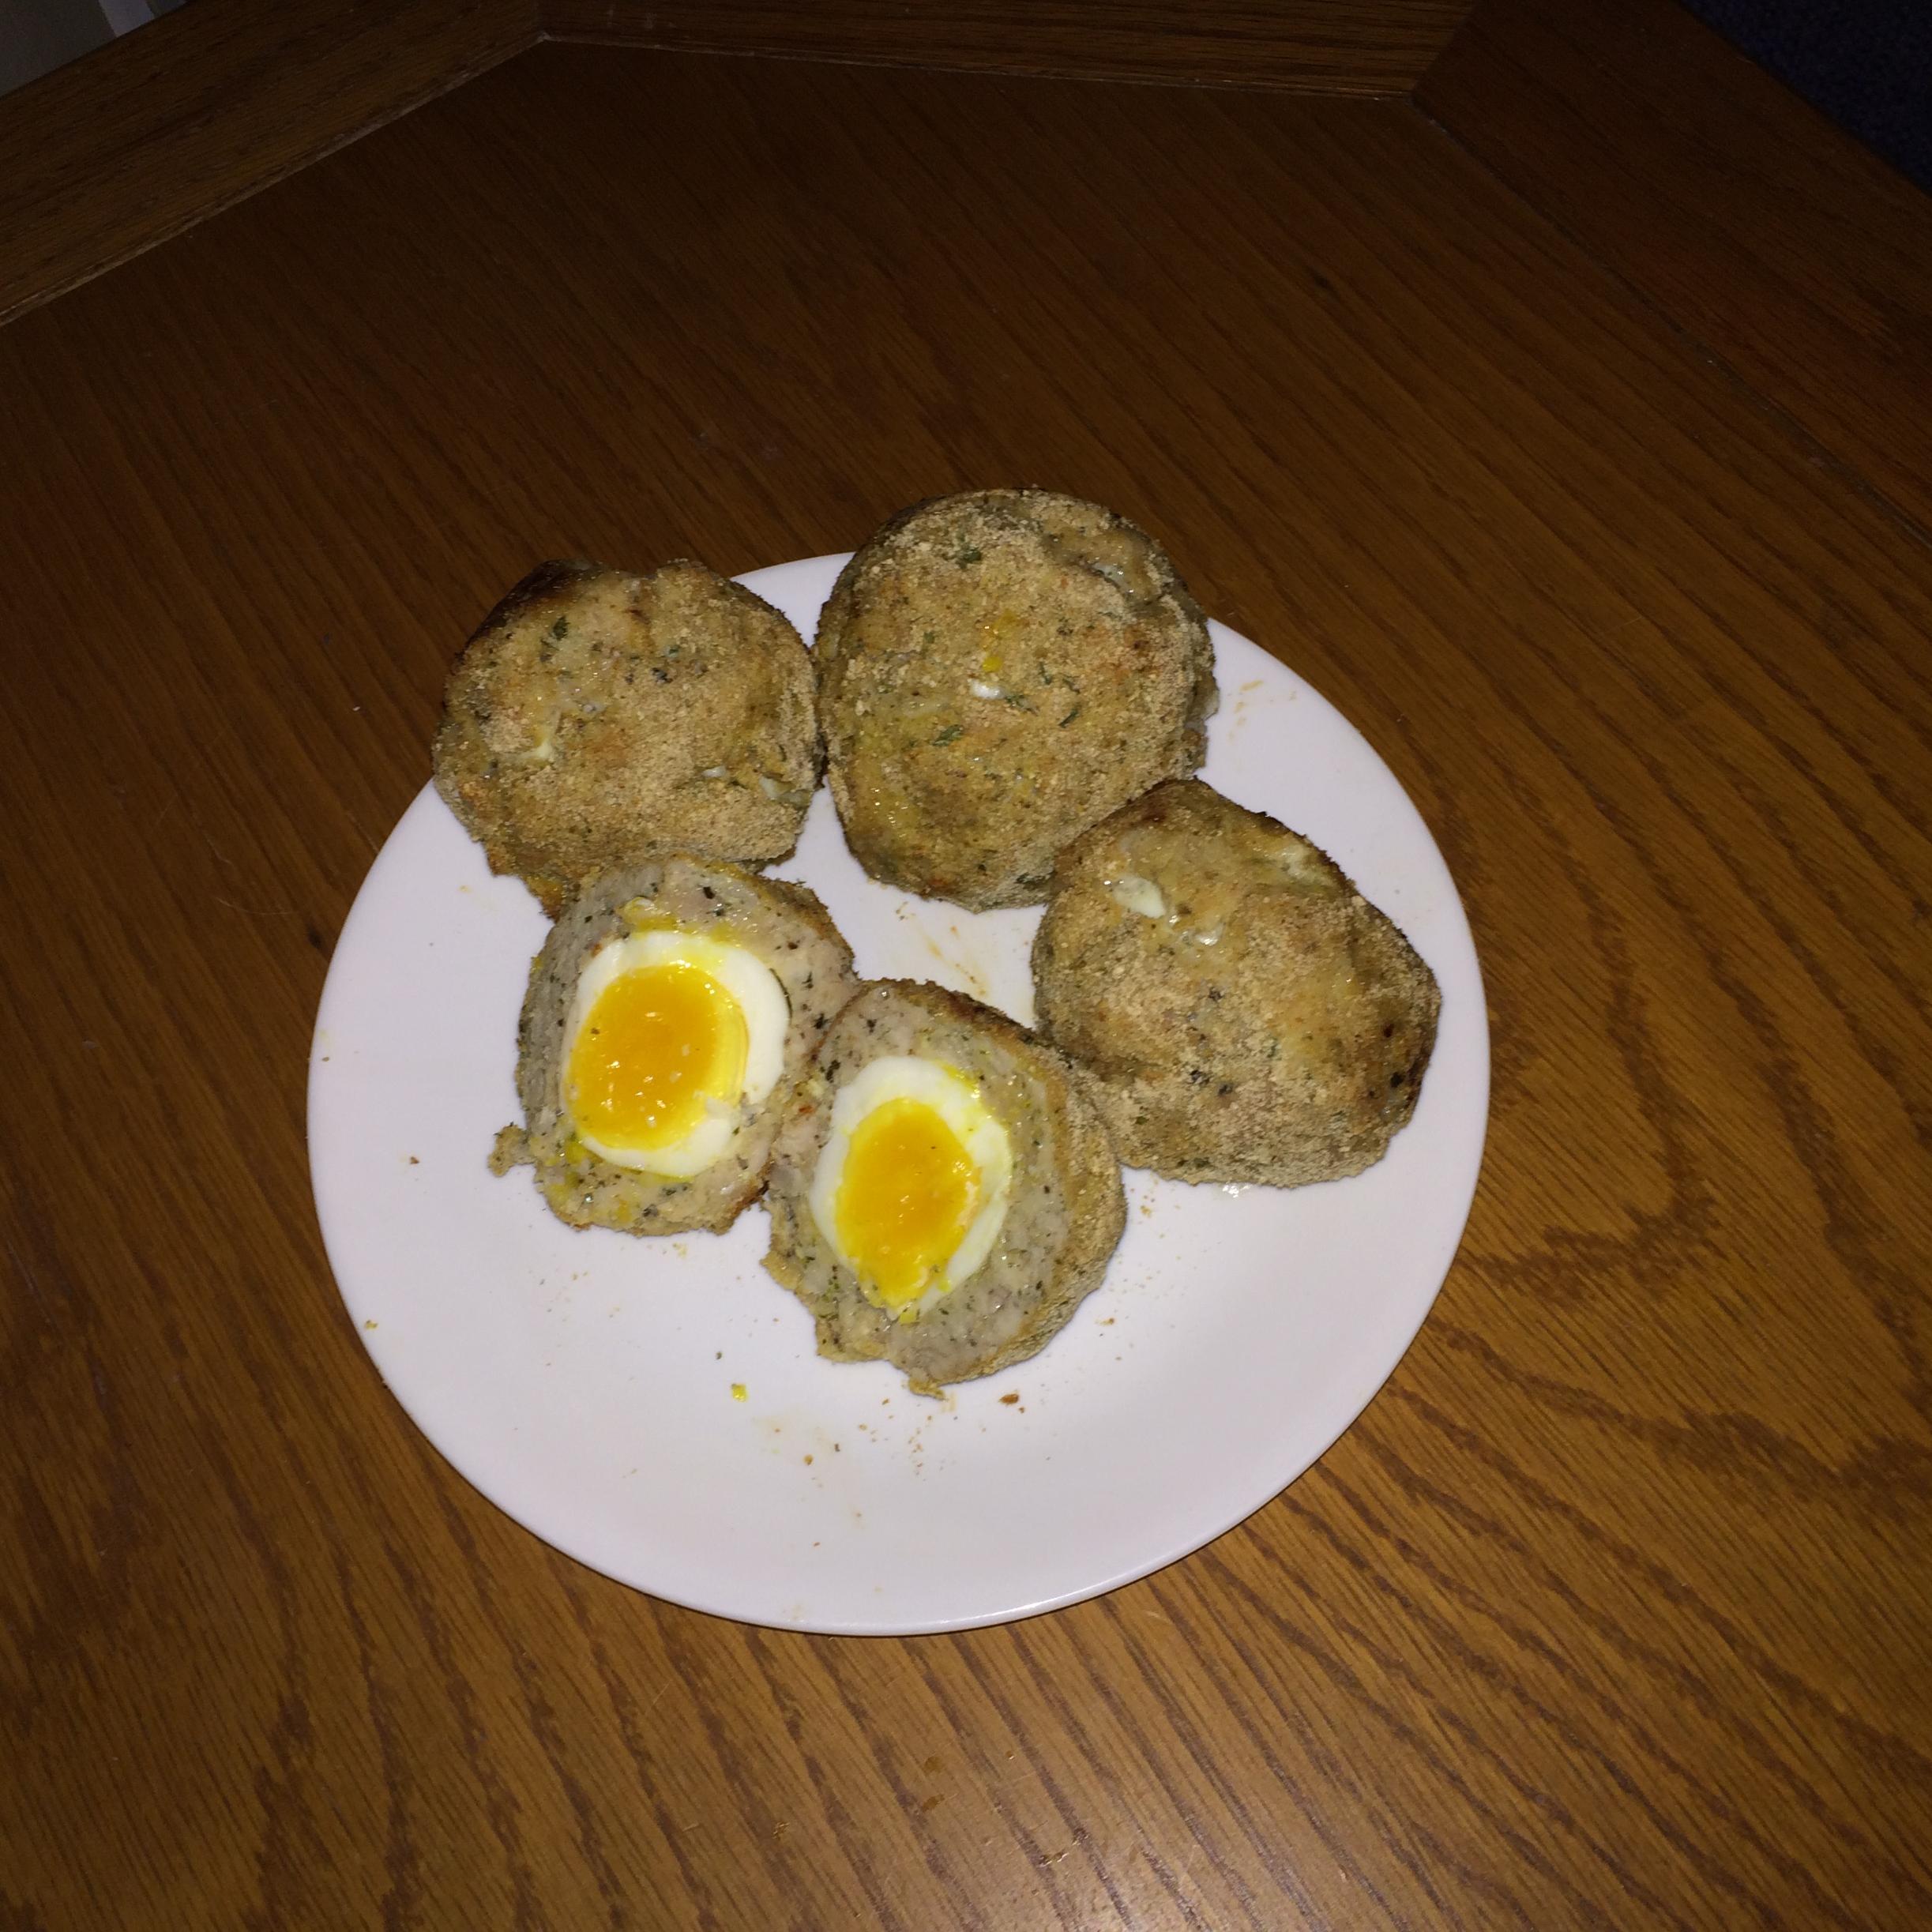 Delicious Baked Scotch Eggs Recipe With Mustard Sauce